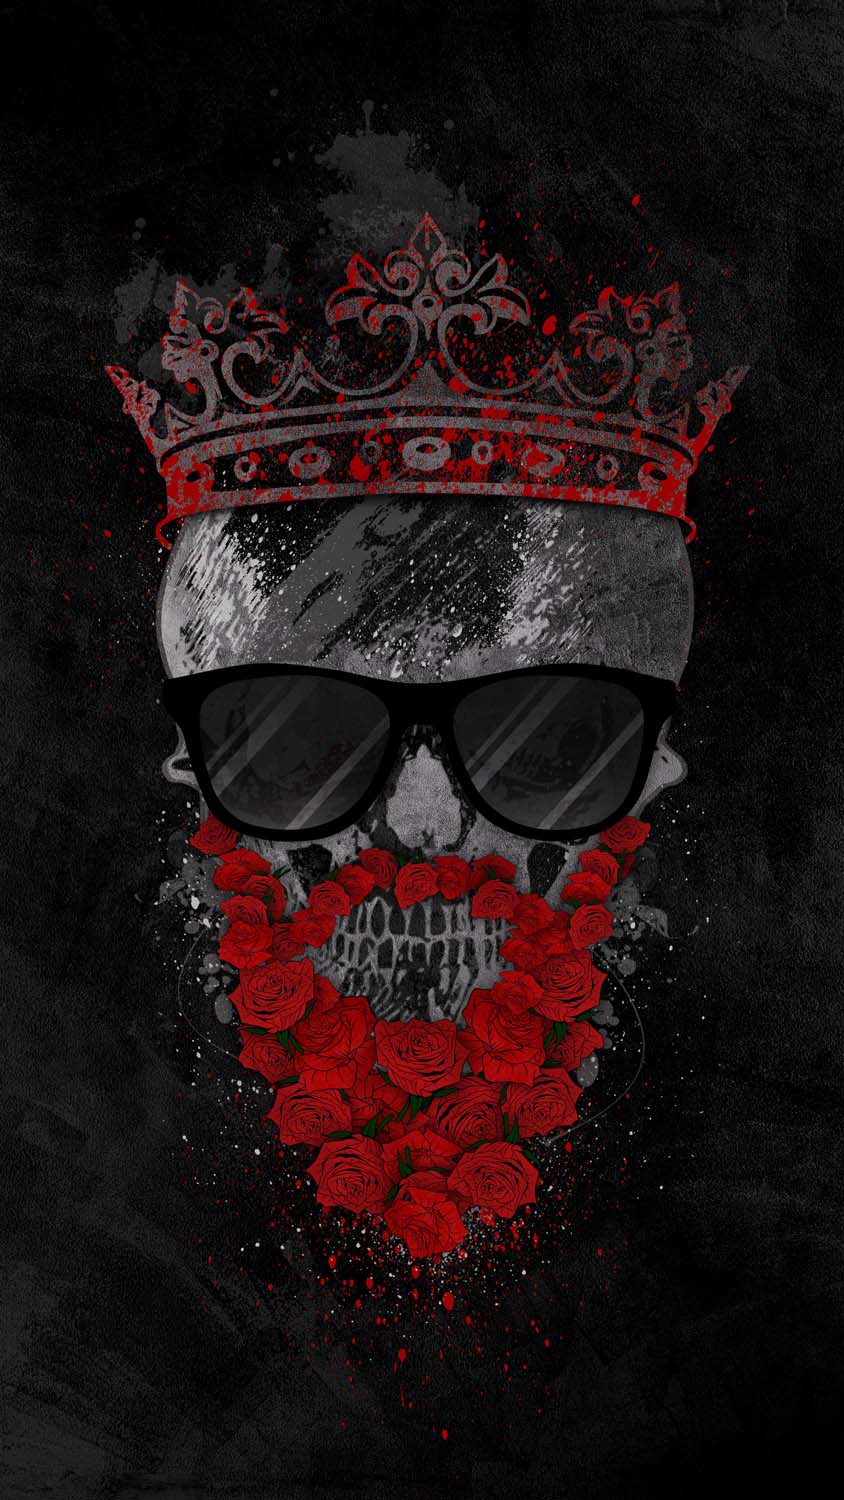 Rose King IPhone Wallpaper HD - IPhone Wallpapers : iPhone Wallpapers